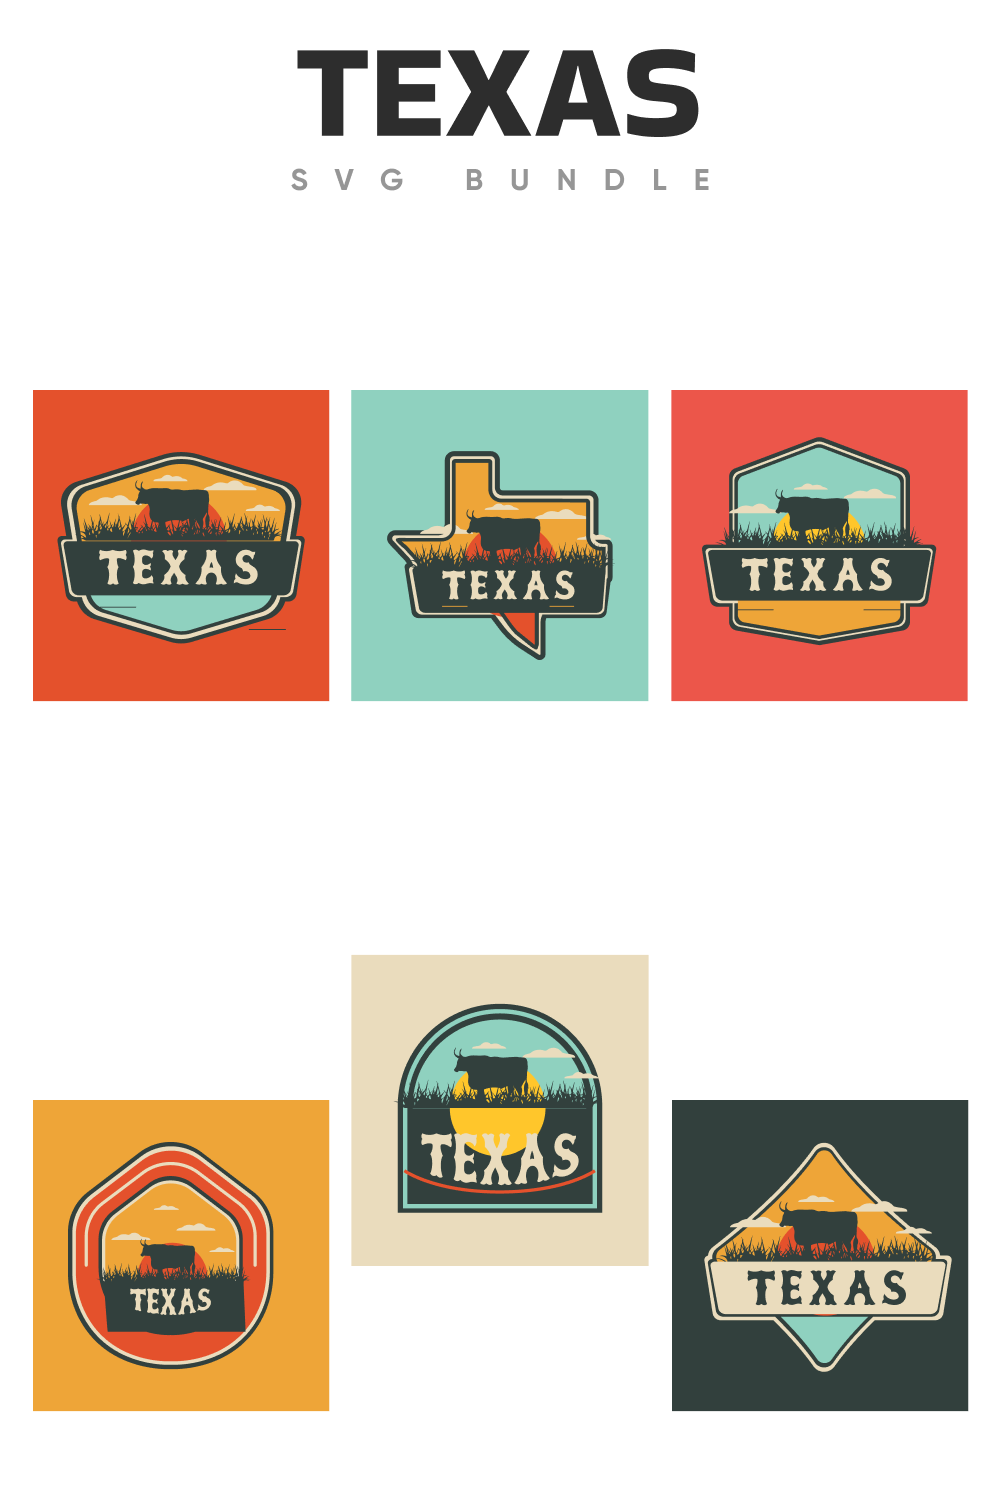 Texas logos in different colors.